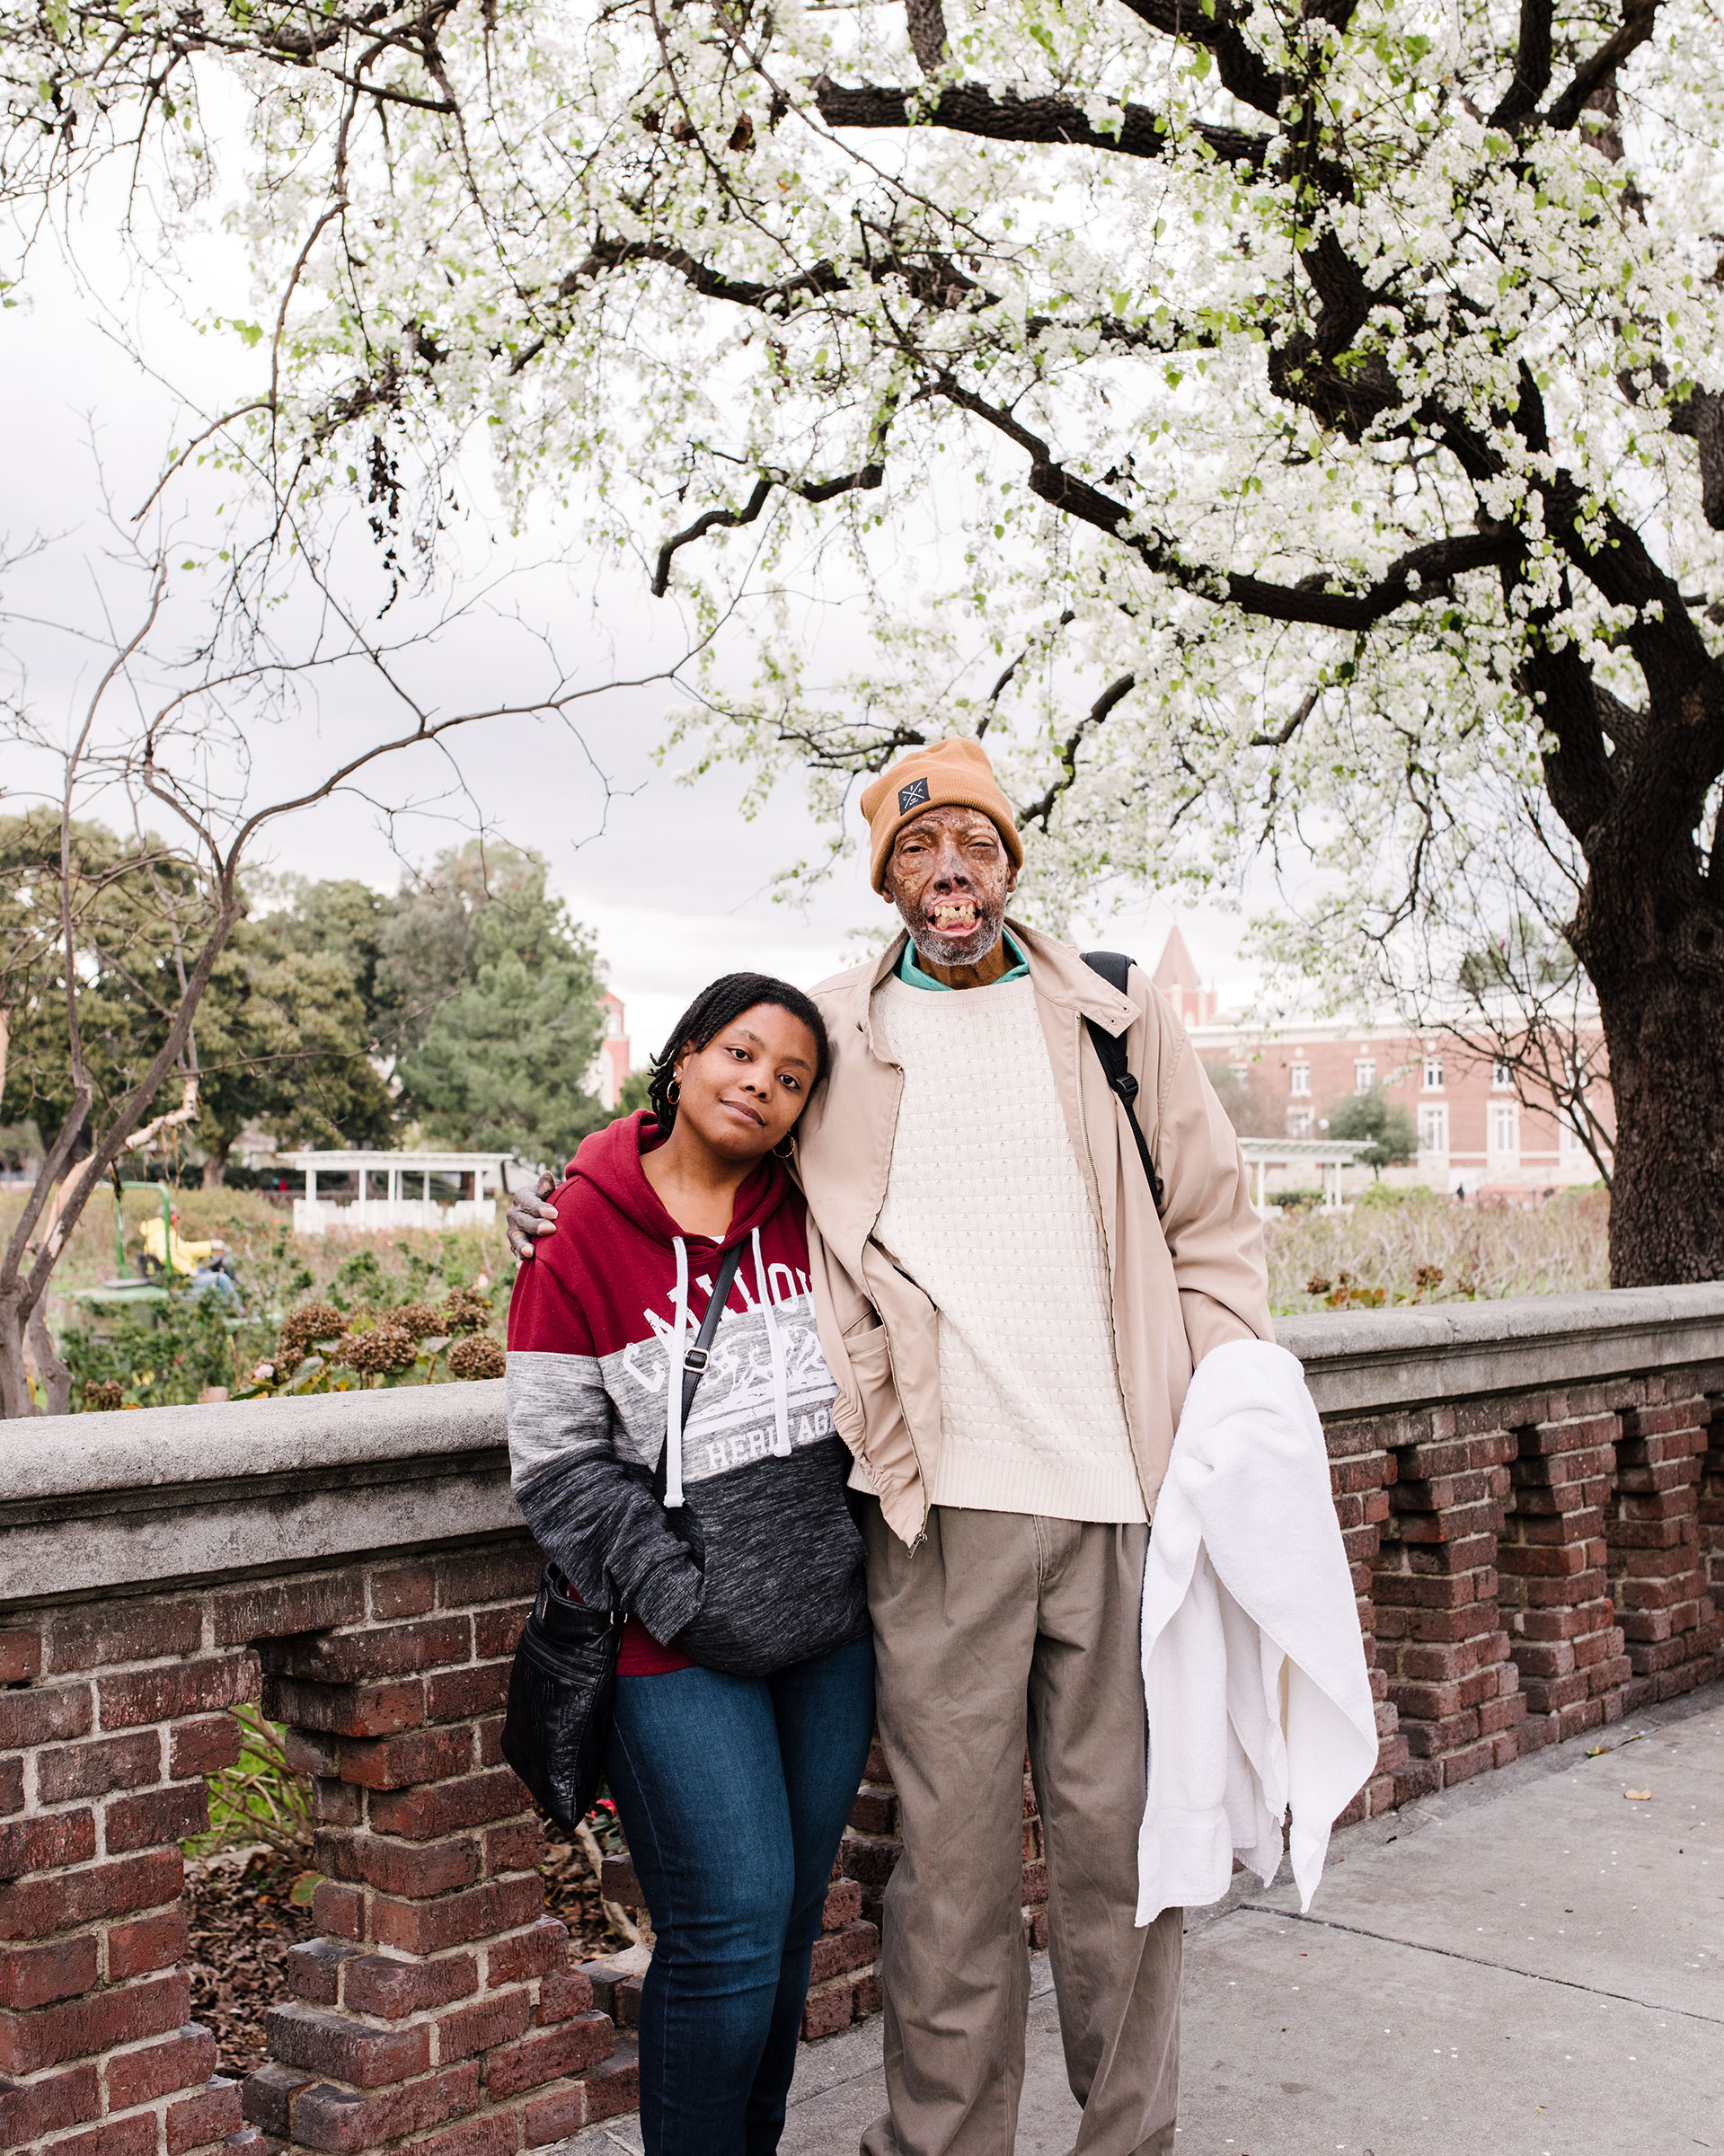 Chelsea with his daughter Ebony at home in California in February 2019, months before his transplant surgery